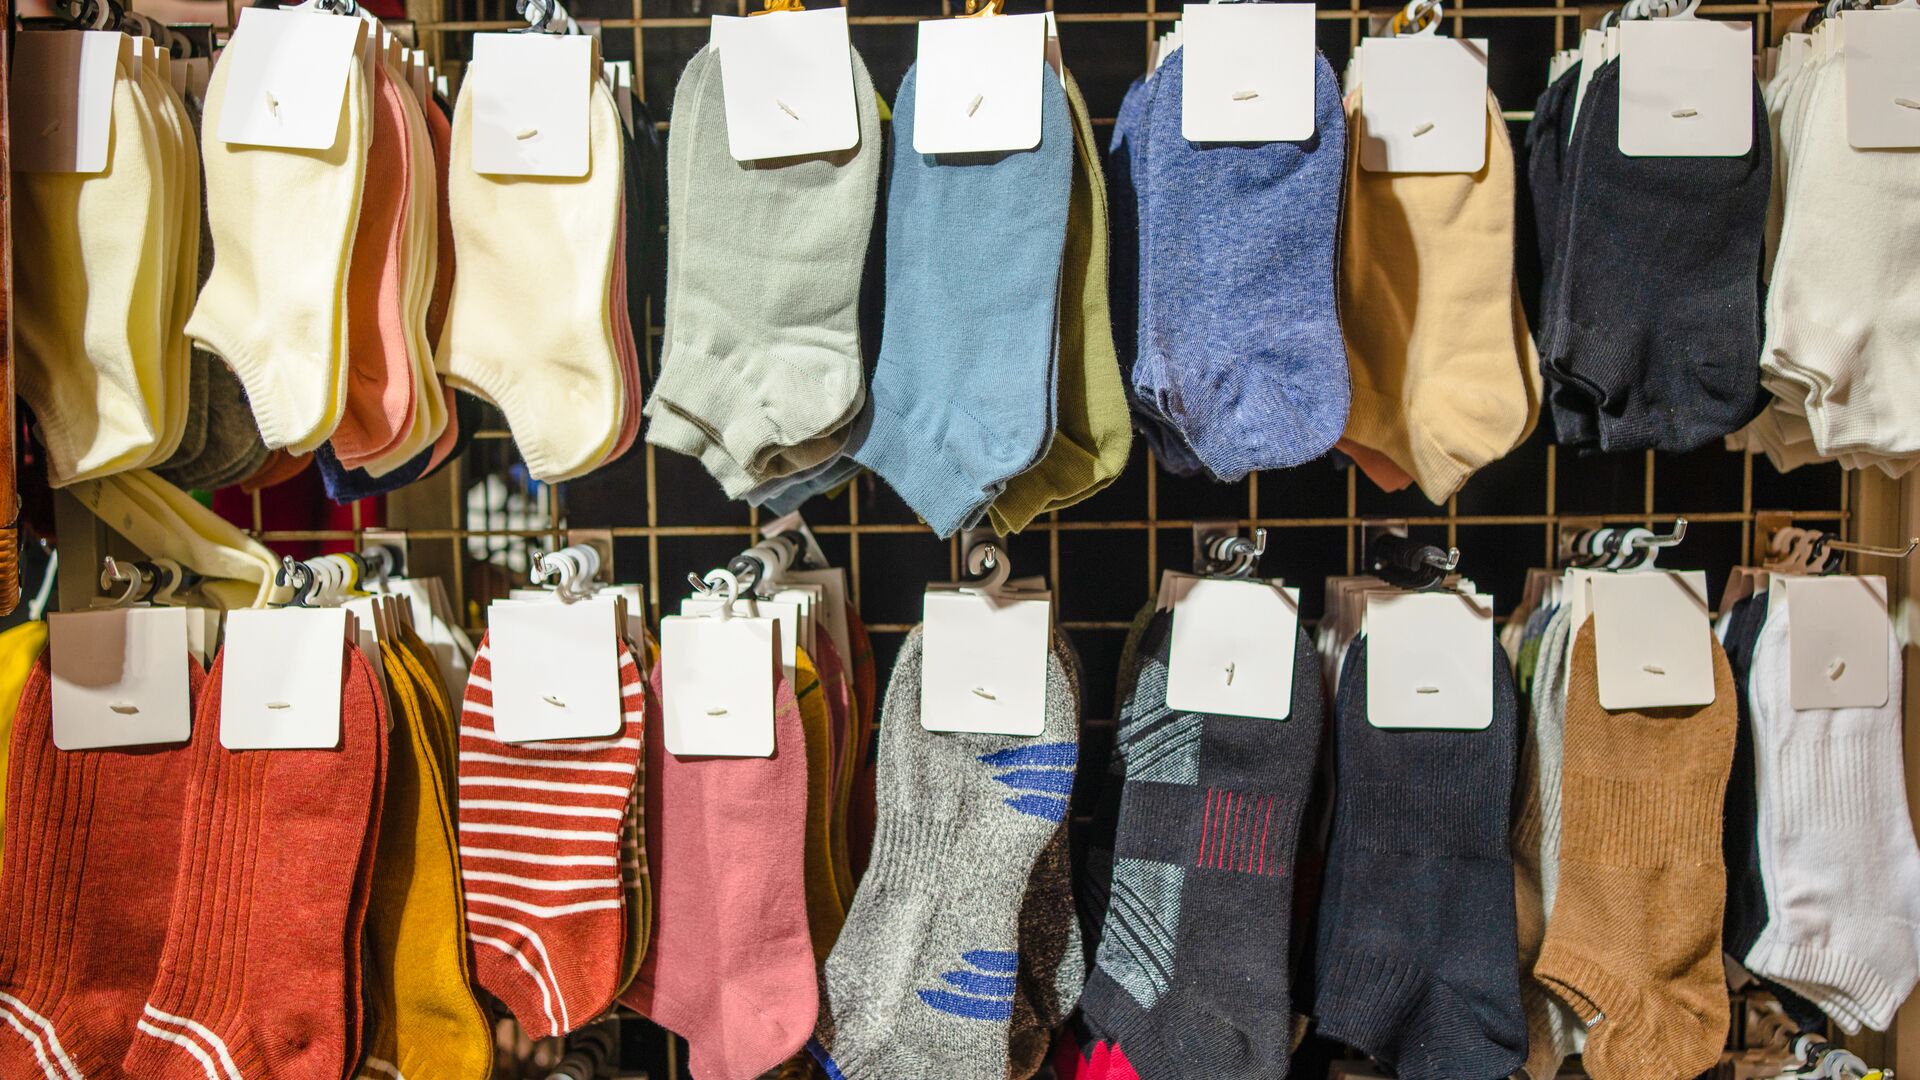 An assortment of colorful wool socks are set on display in the apparel section of a department store.